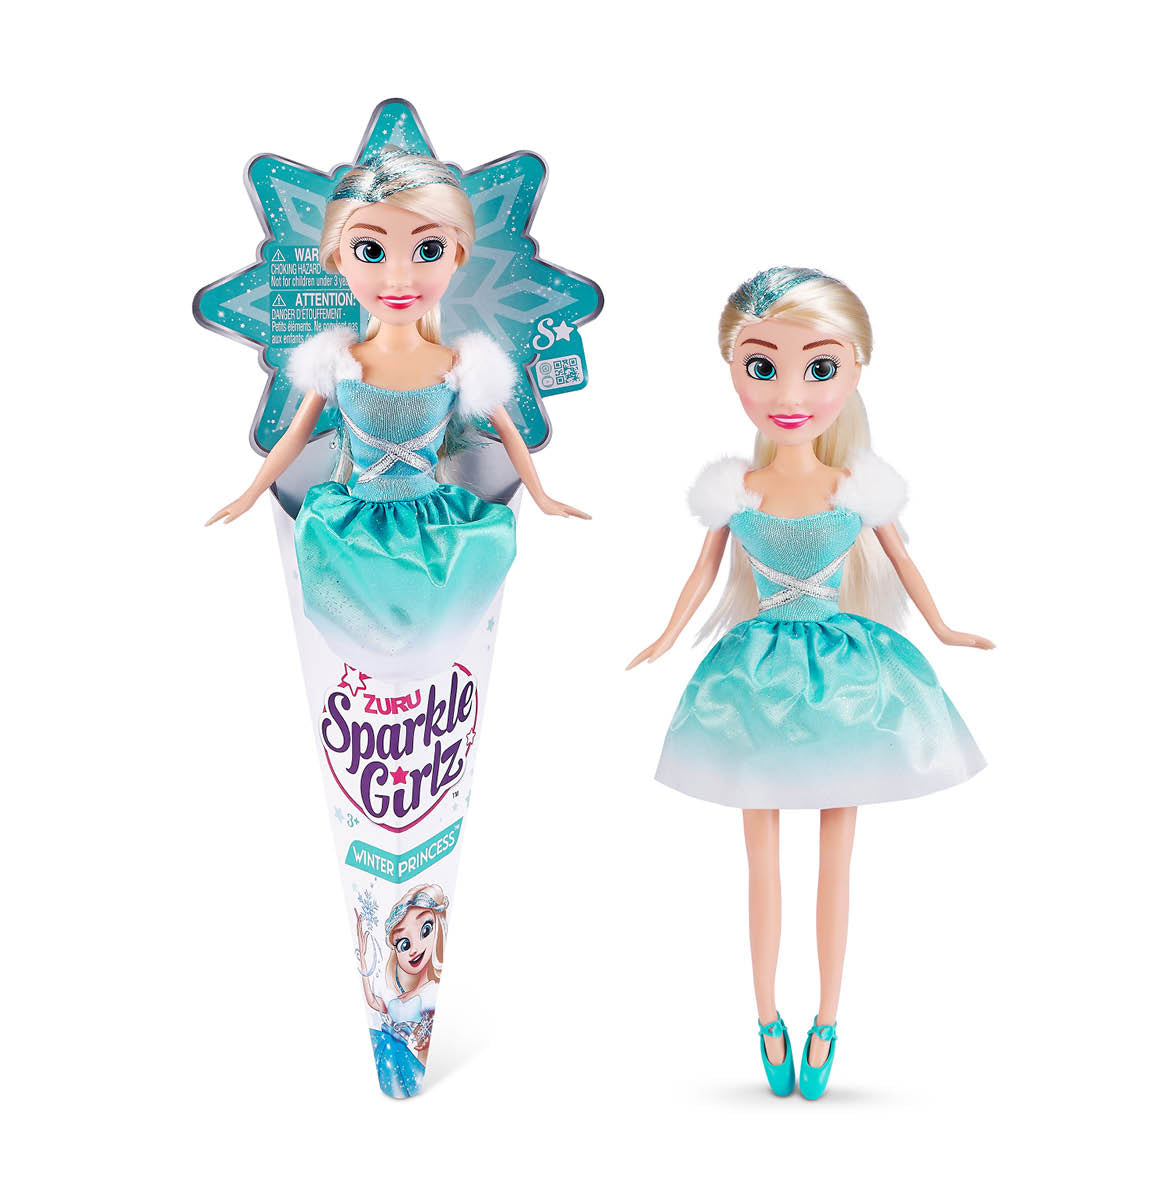 Sparkle Girlz Winter Princess Doll in Teal